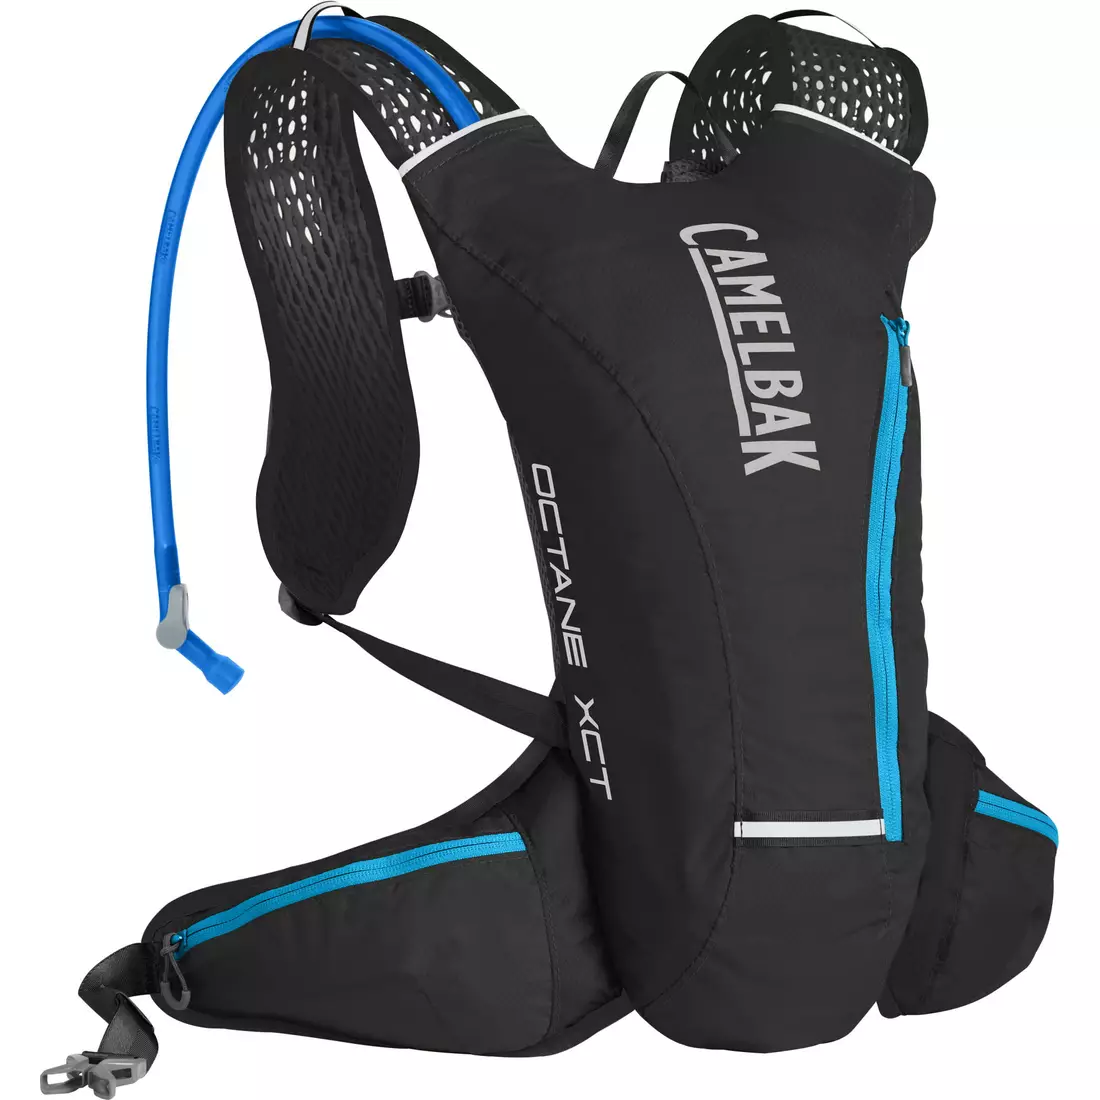 Camelbak SS18 a running backpack with a water bag Octane XCT 70 oz Black/Atomic Blue 1140001900